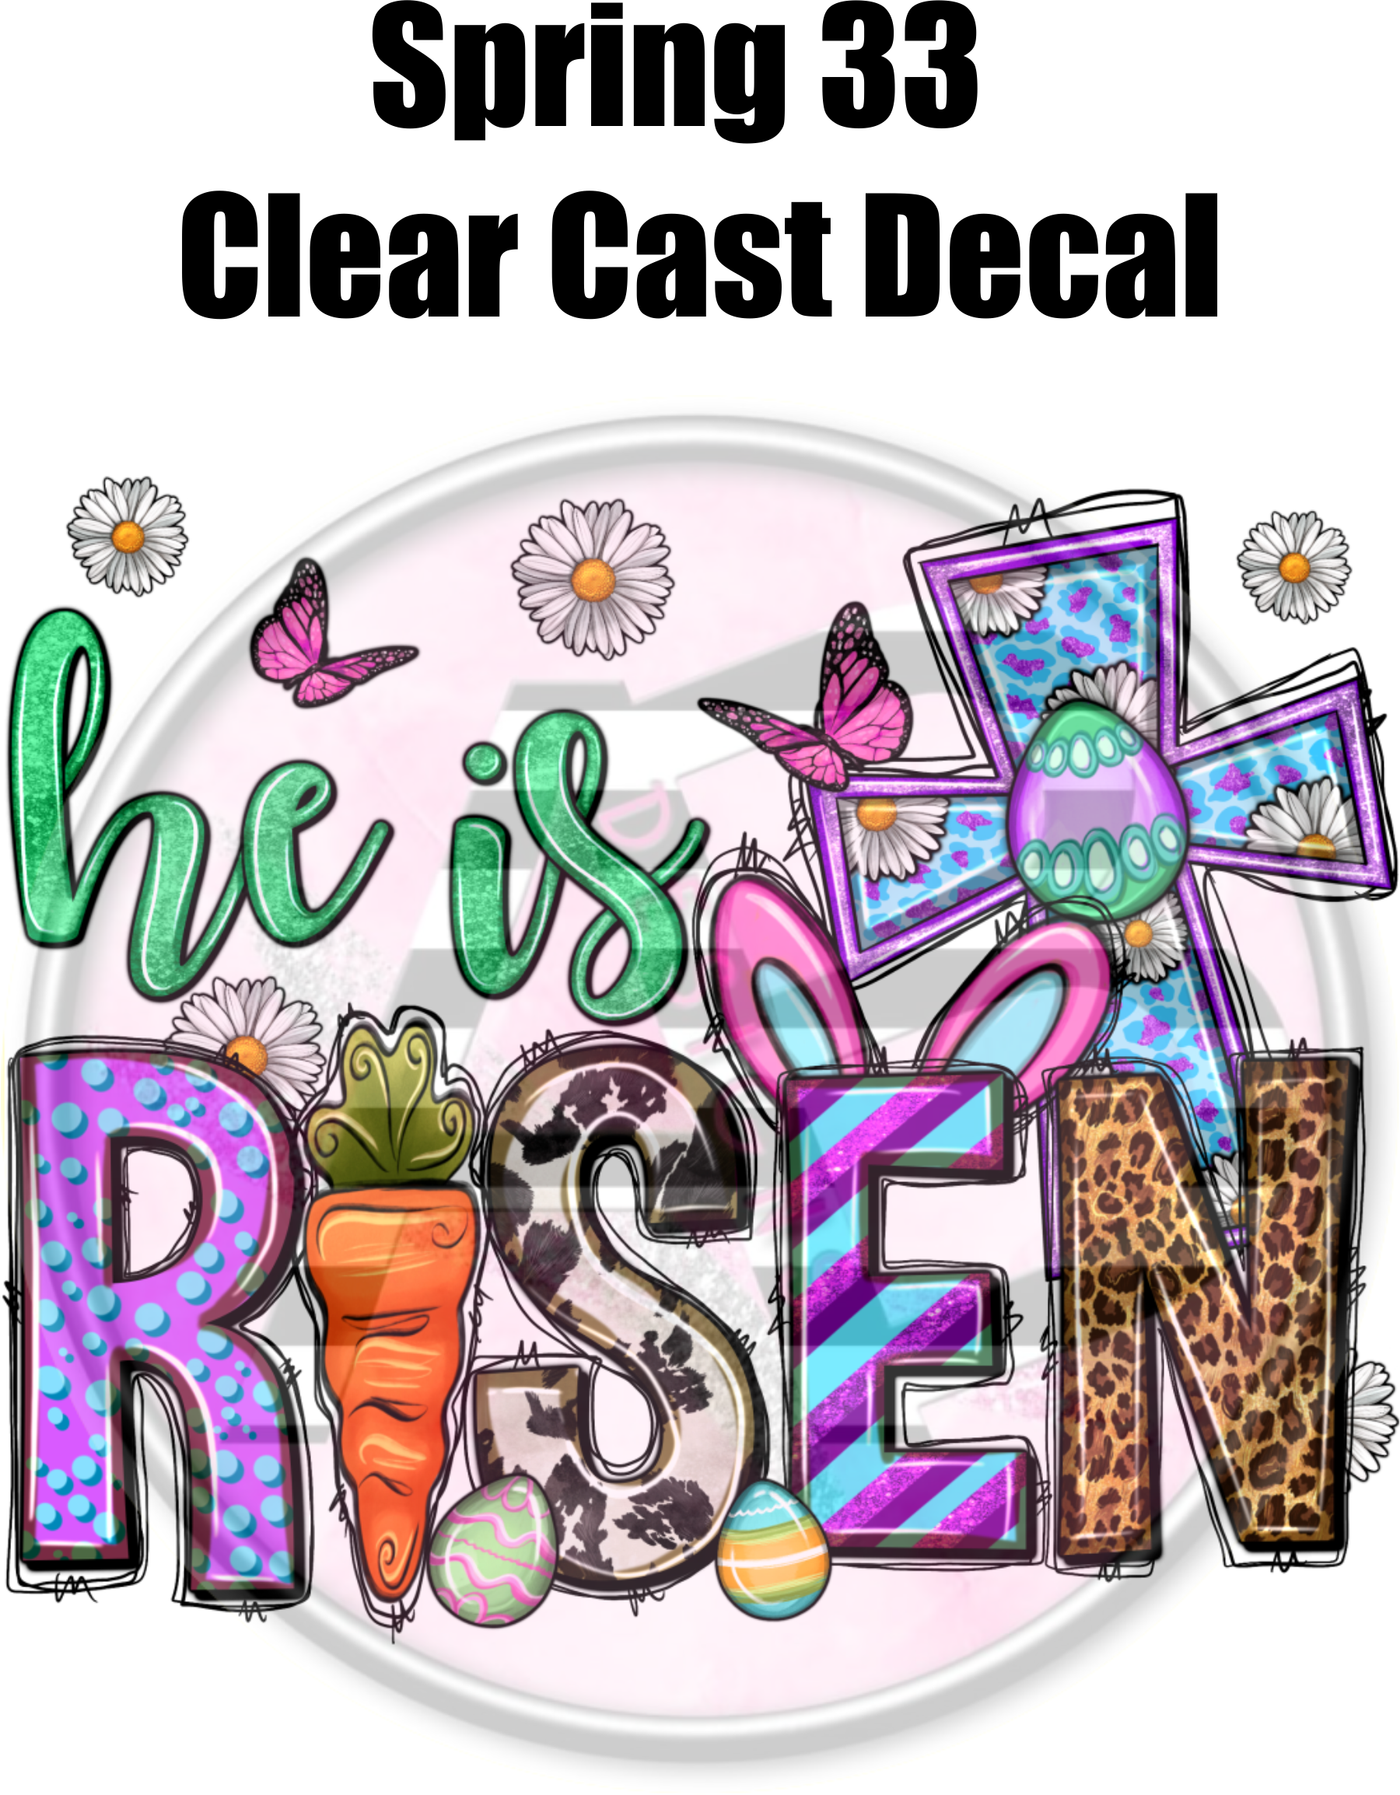 Spring 33 - Clear Cast Decal